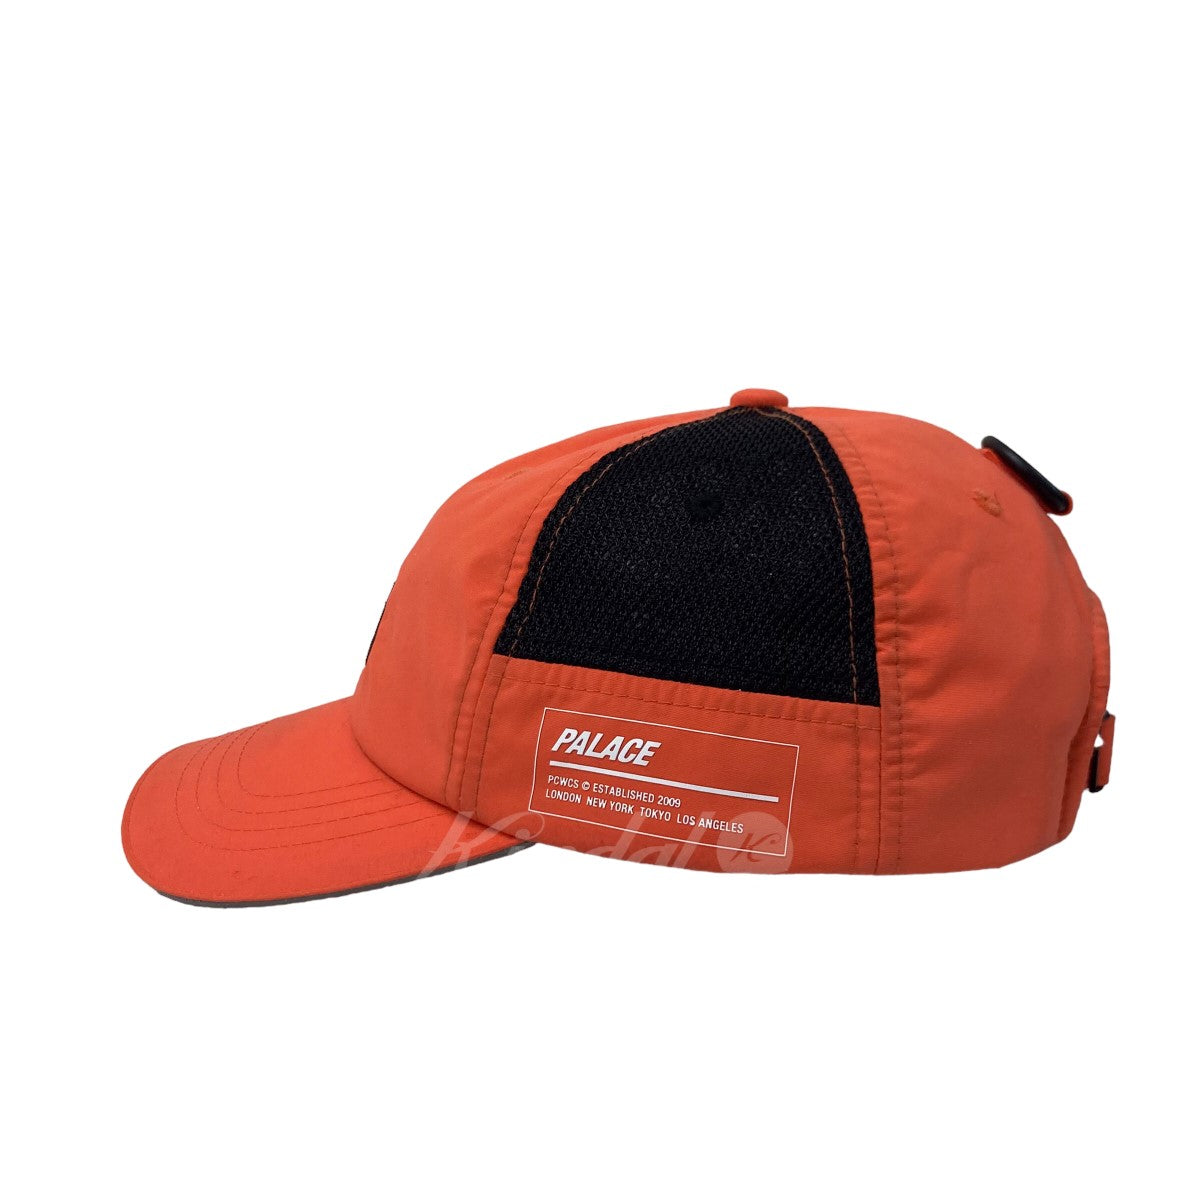 PALACE(パレス) 23AW｢MILITARLY SHELL TRI-FERG PATCH 6-PANEL｣キャップ